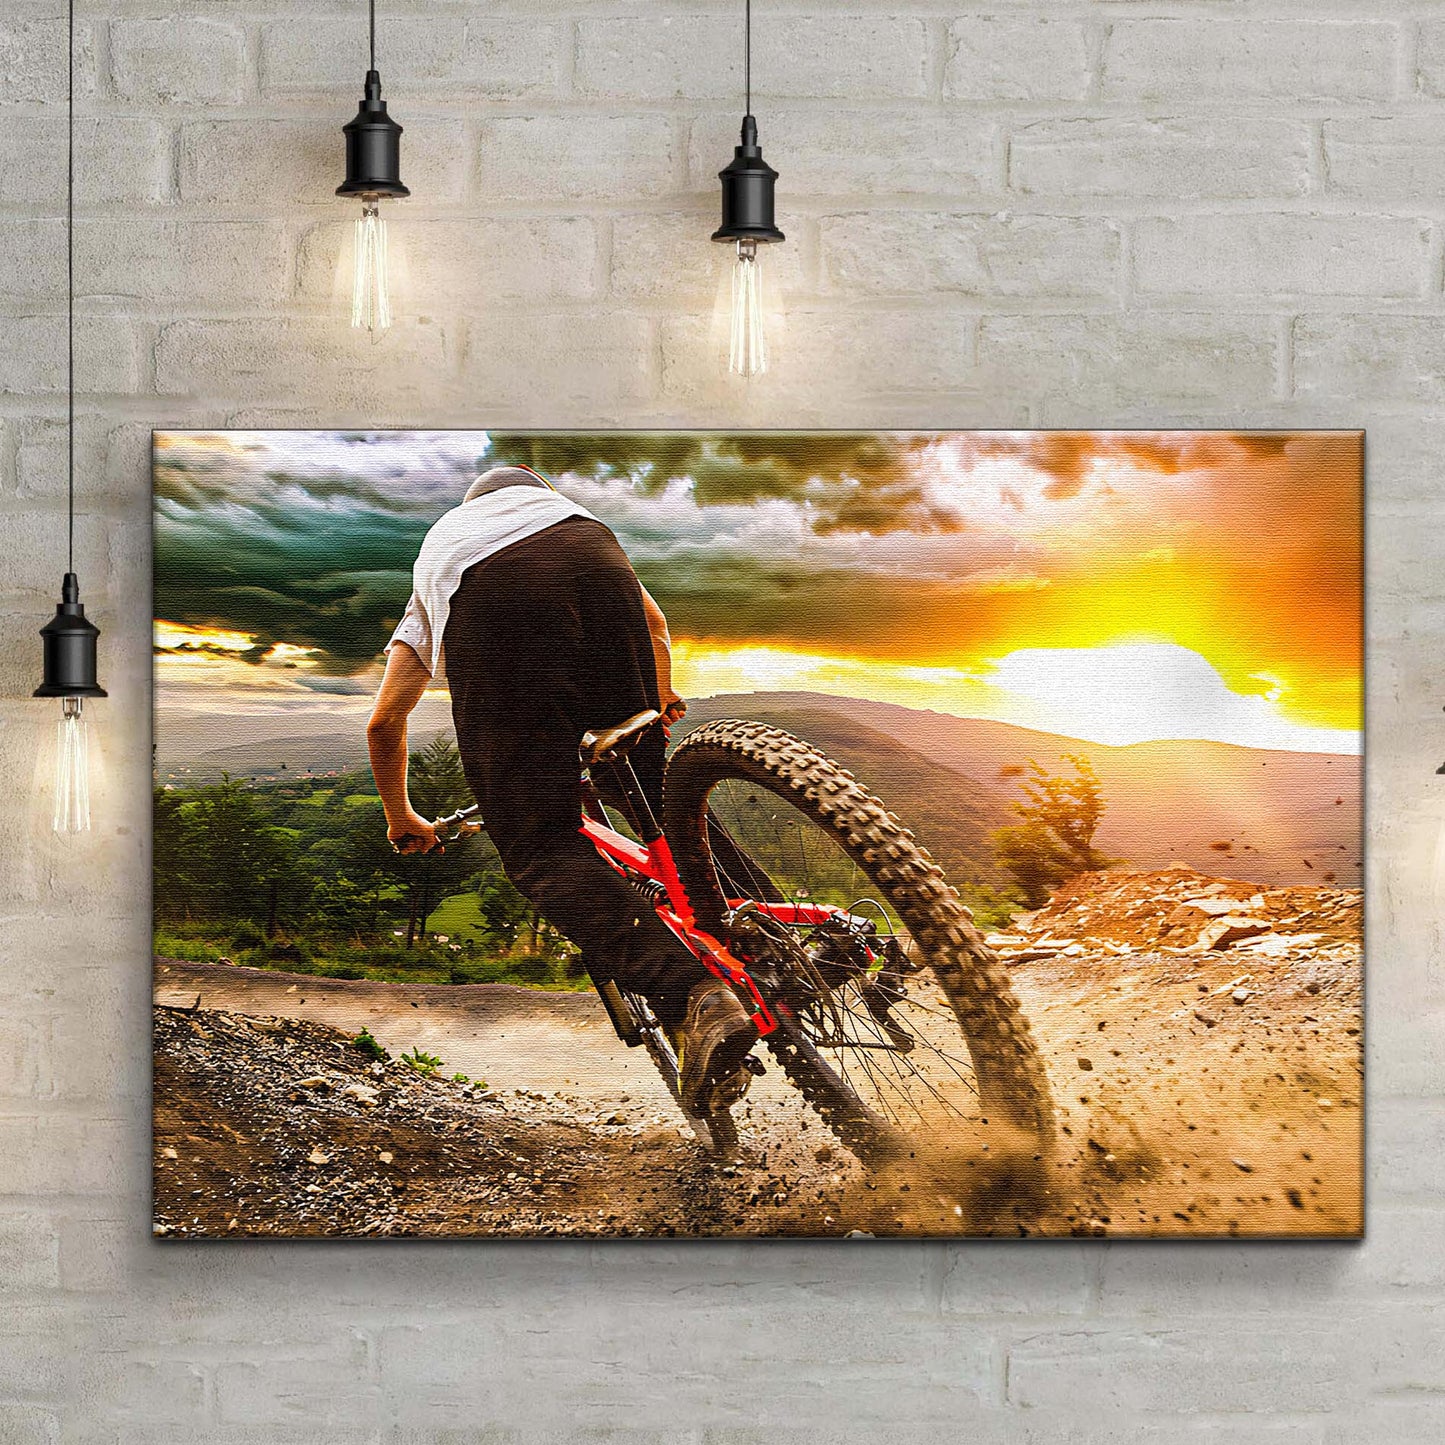 Cycling On Dirt Road Canvas Wall Art Style 1 - Image by Tailored Canvases